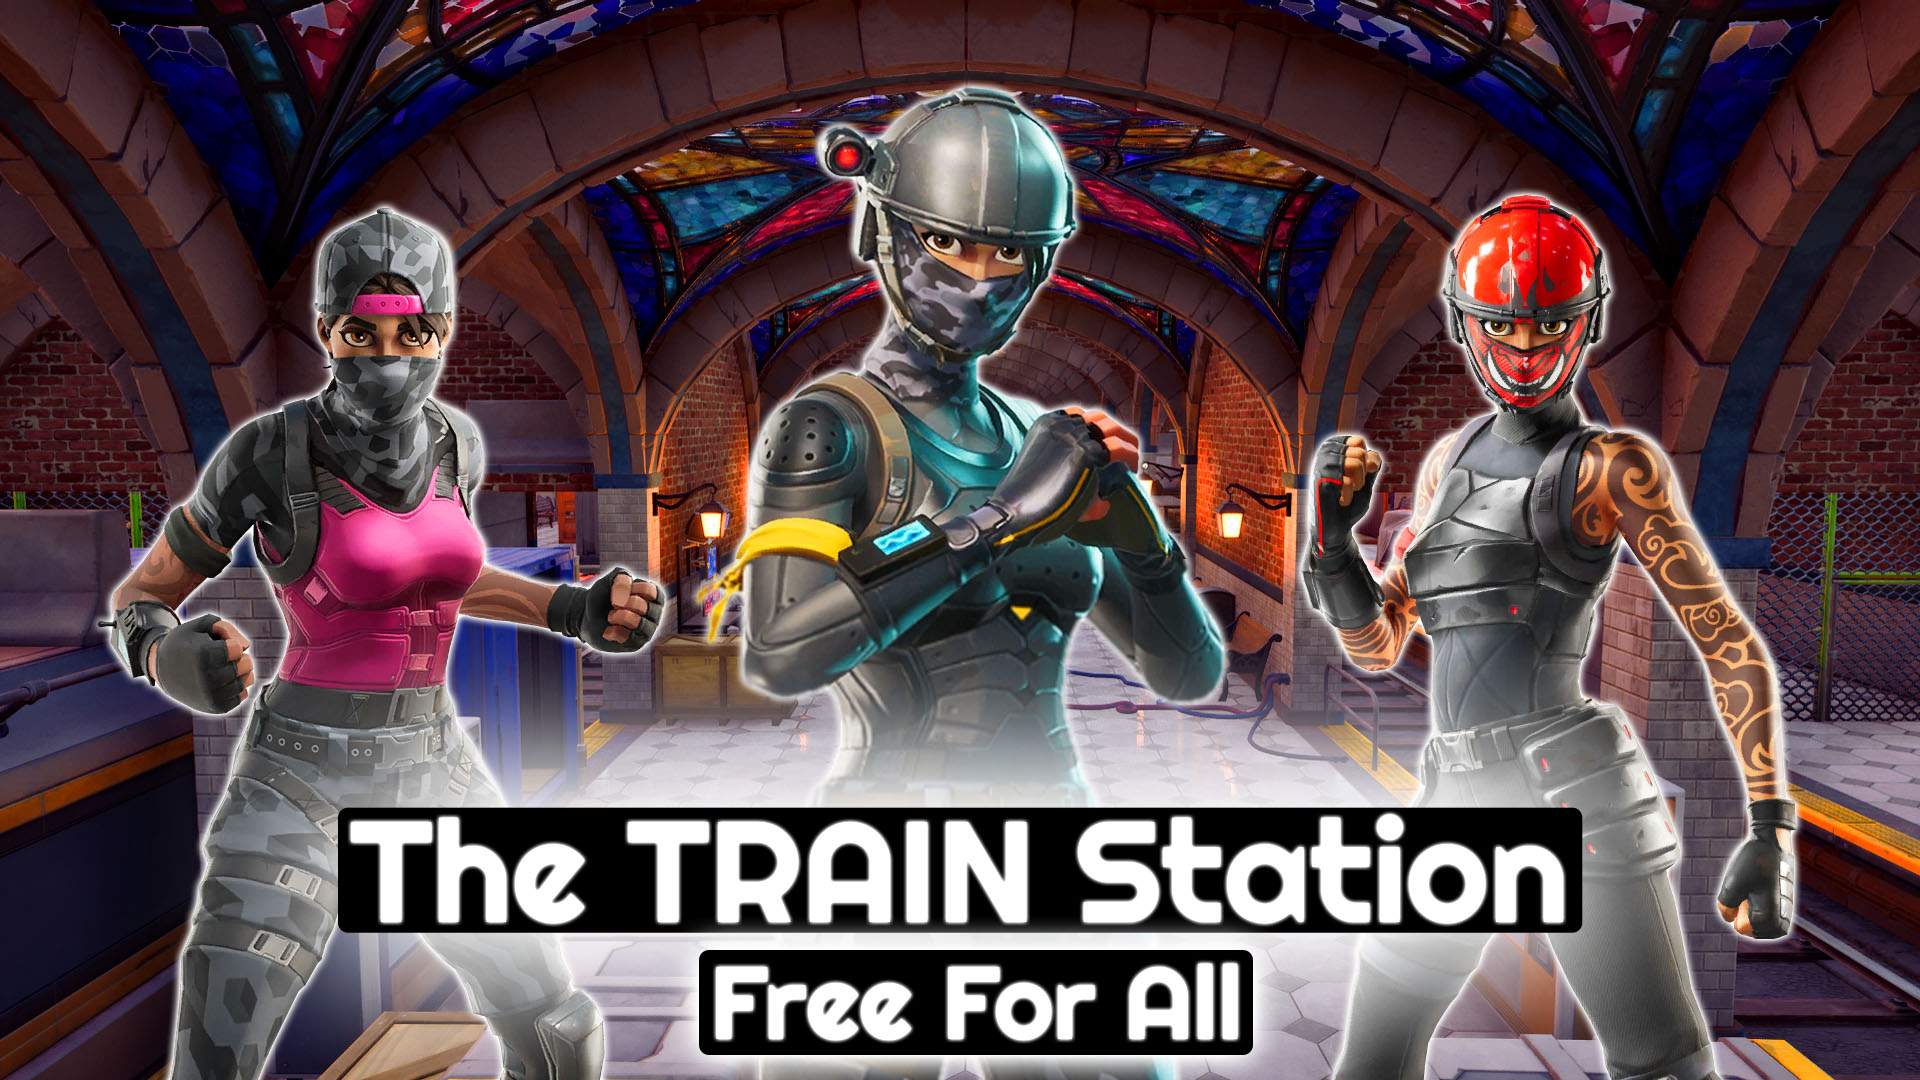 The TRAIN Station - Free For All